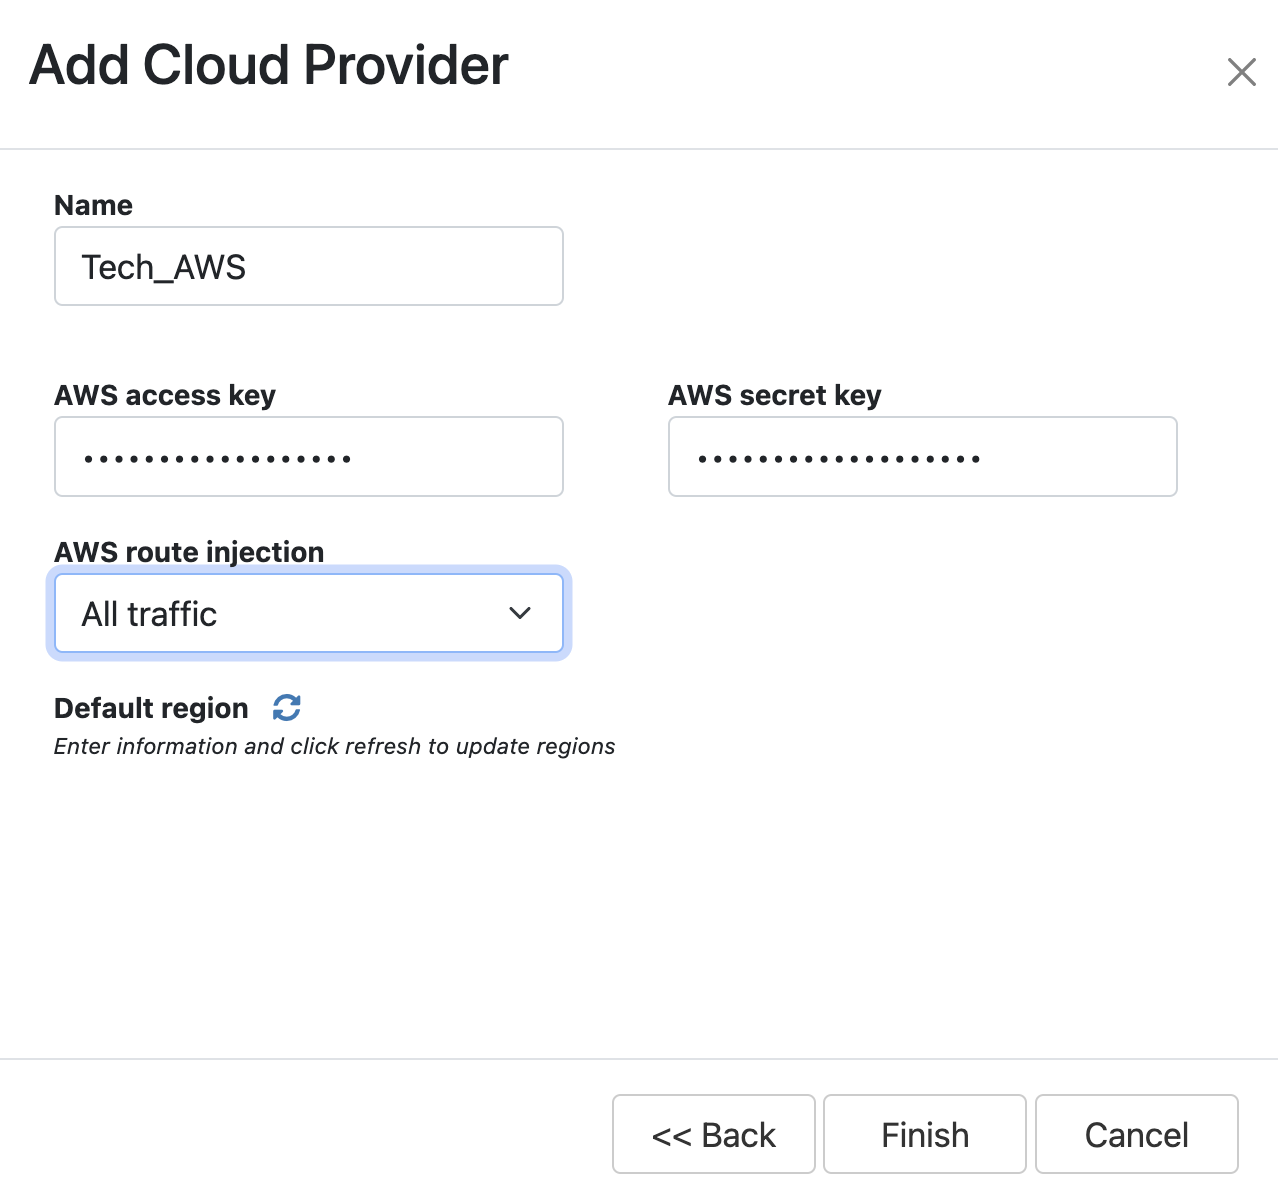 Enter cloud credentials and select options on the Add cloud provider page